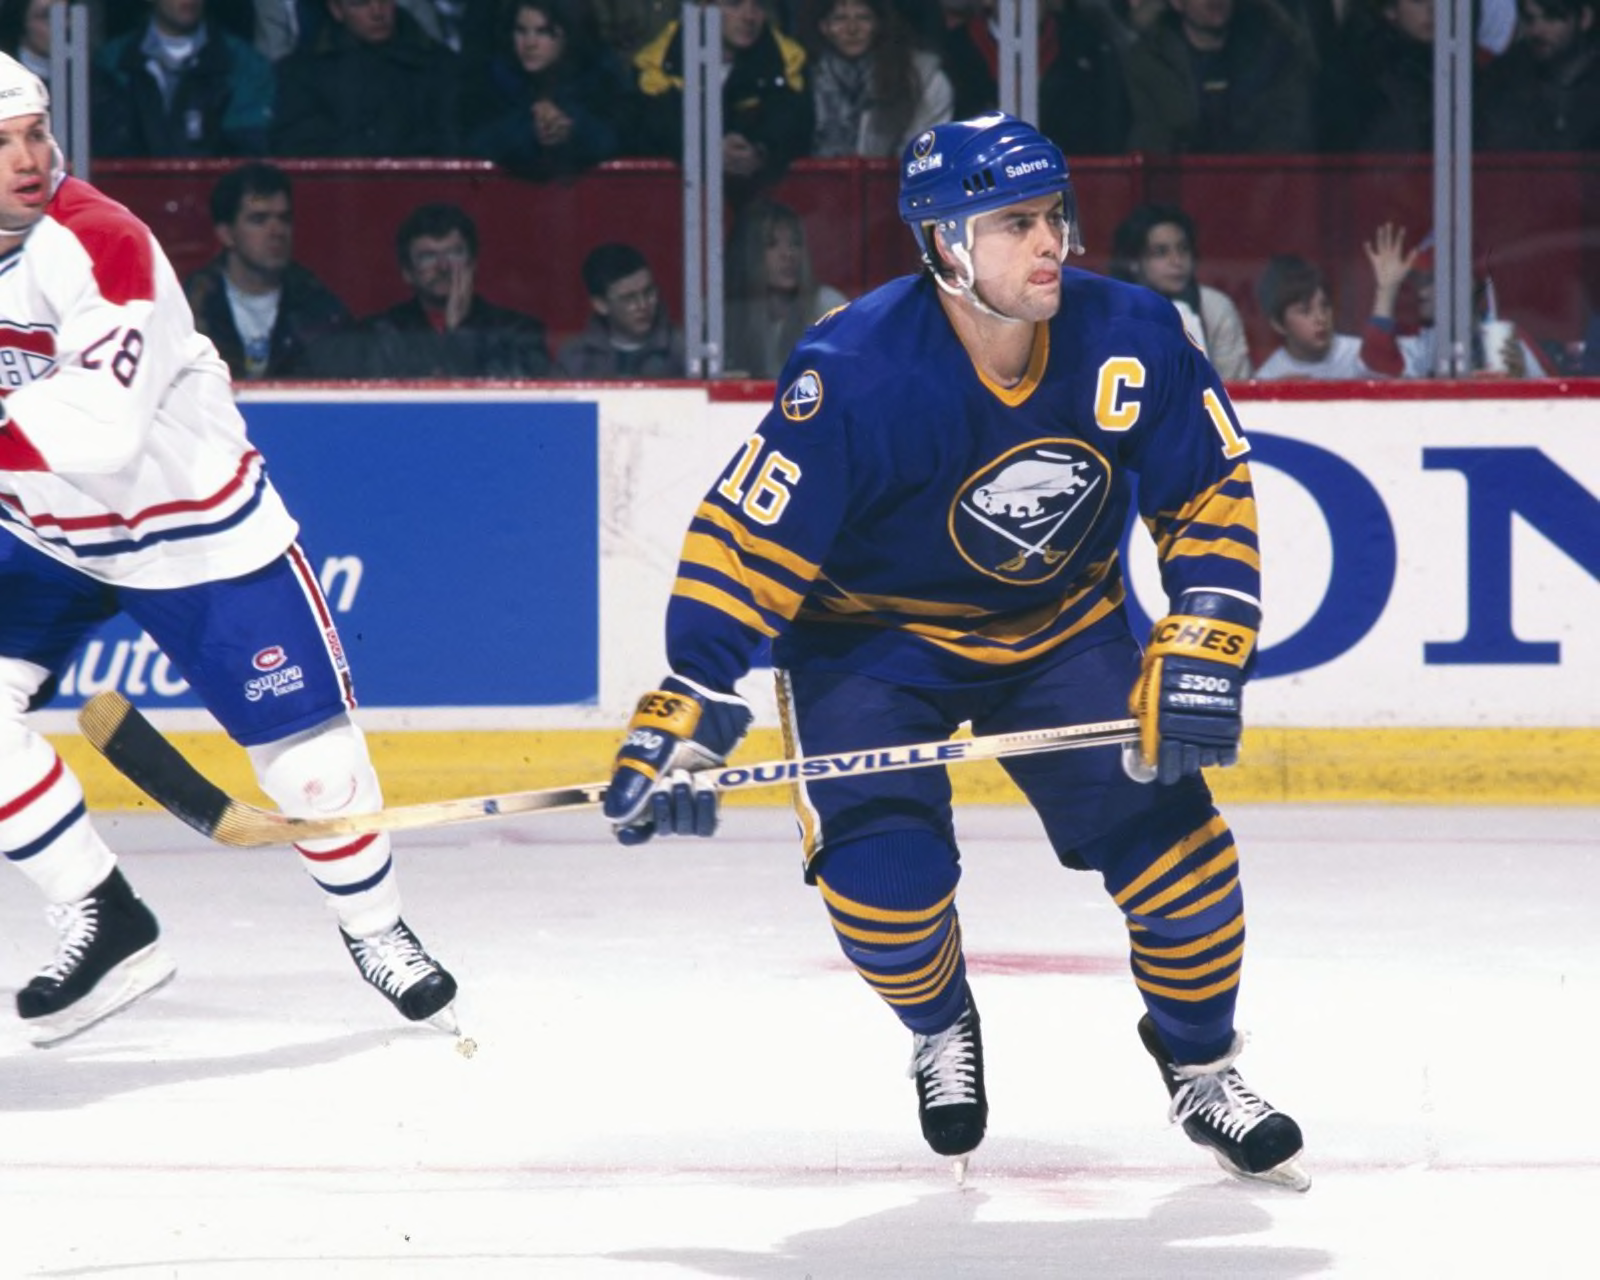 Sabres expected to name Pat Lafontaine president of hockey ops